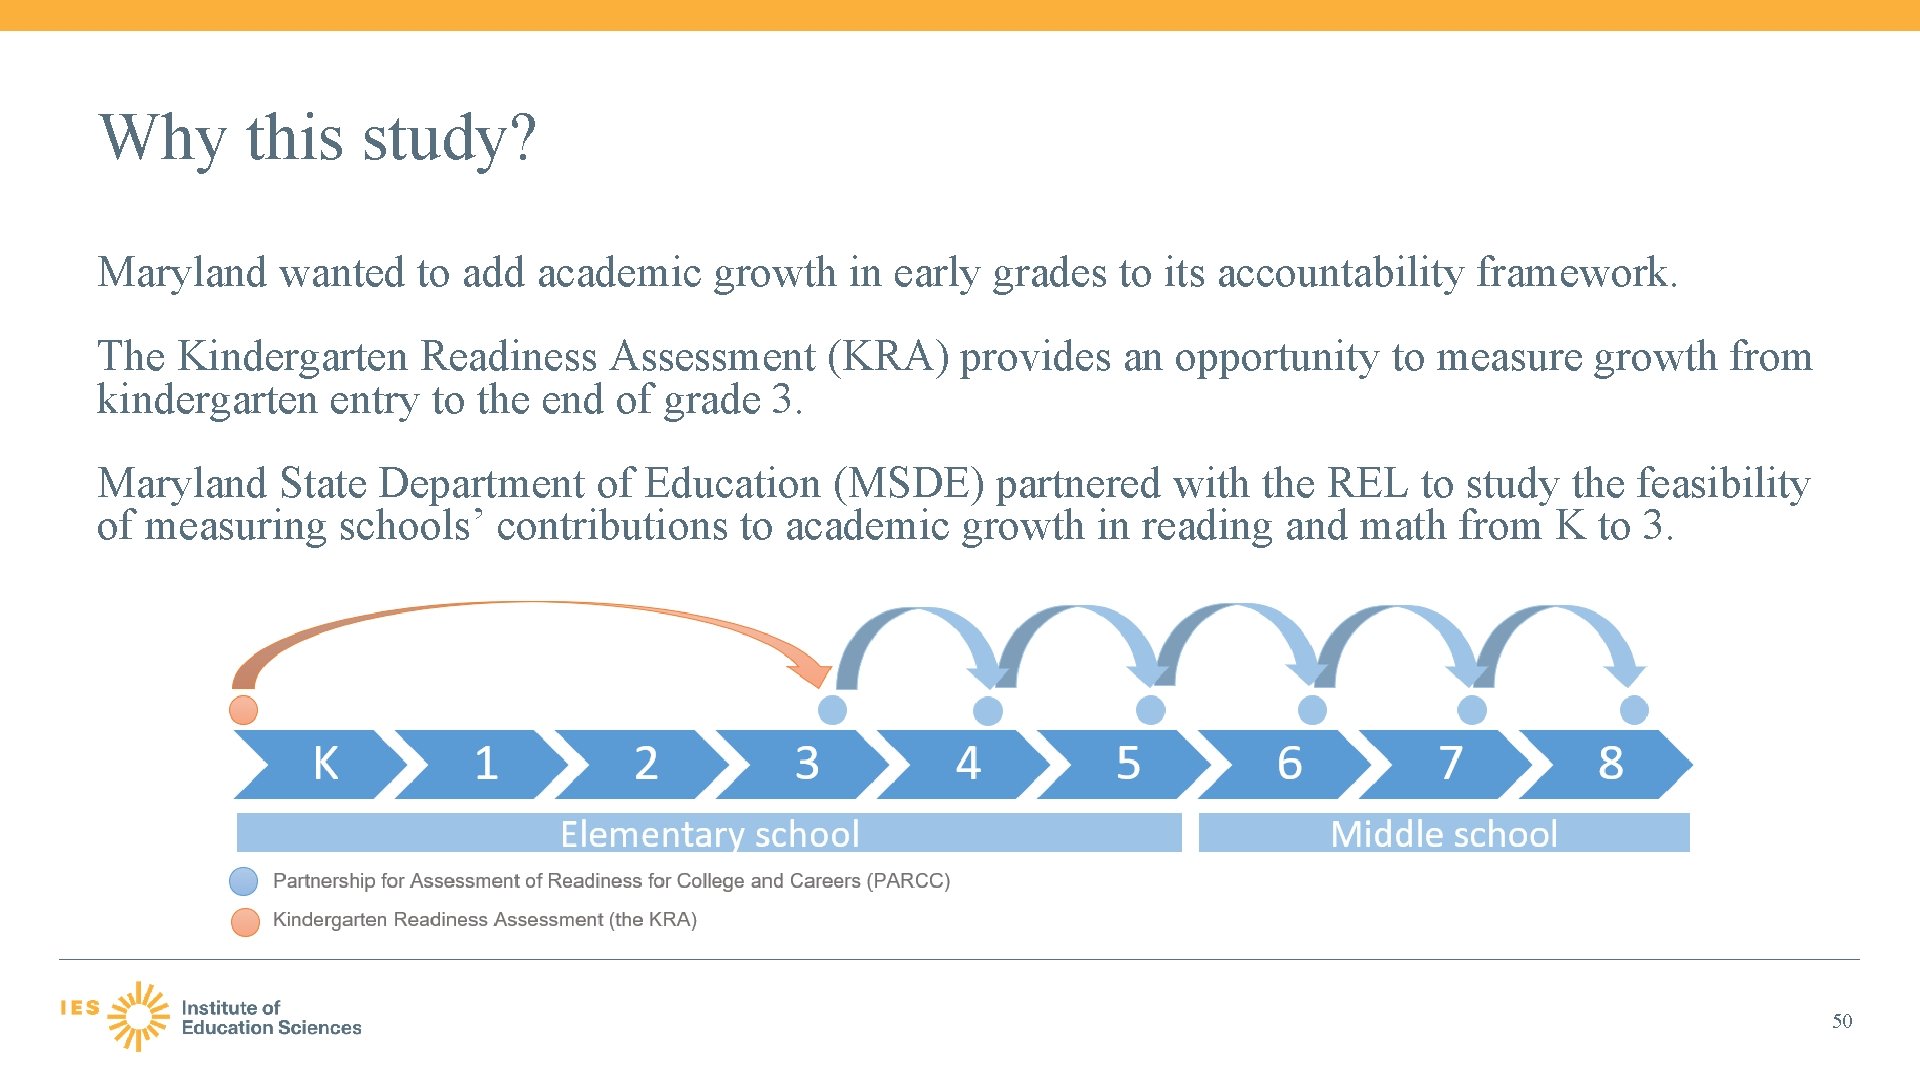 Why this study? Maryland wanted to add academic growth in early grades to its